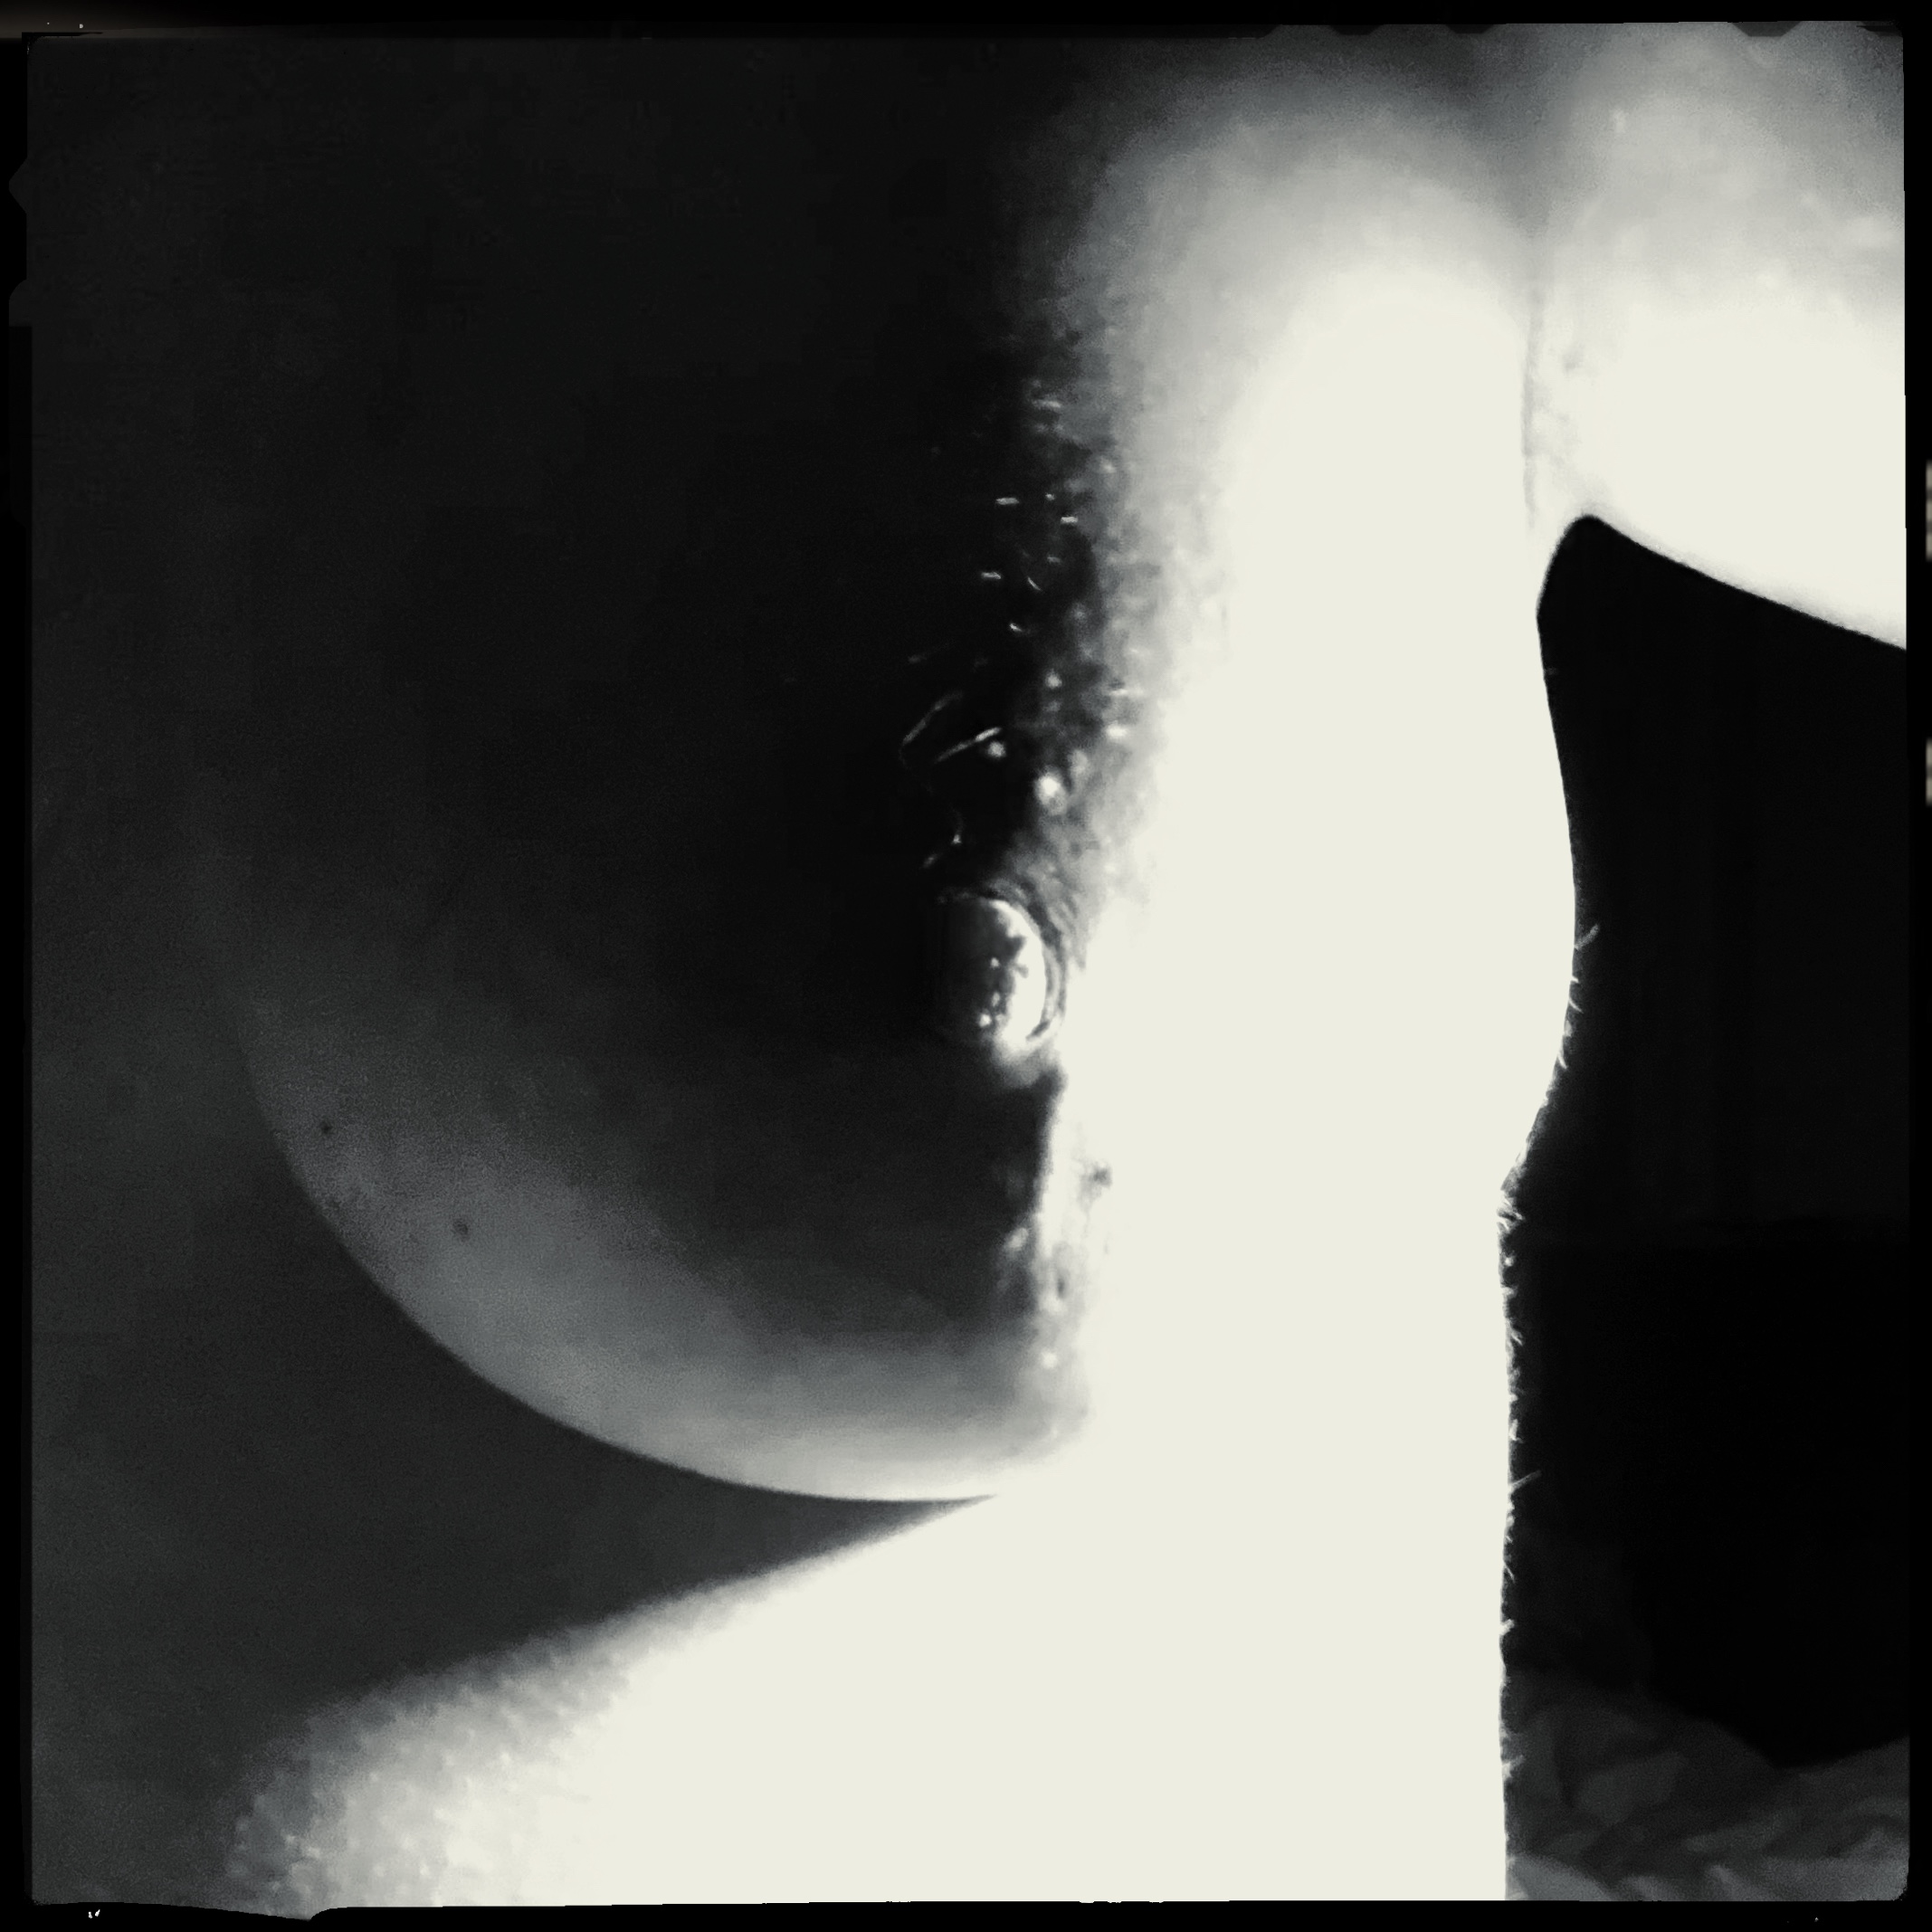 A black and white image of my breast, lit from the side with the other side in deep shadow